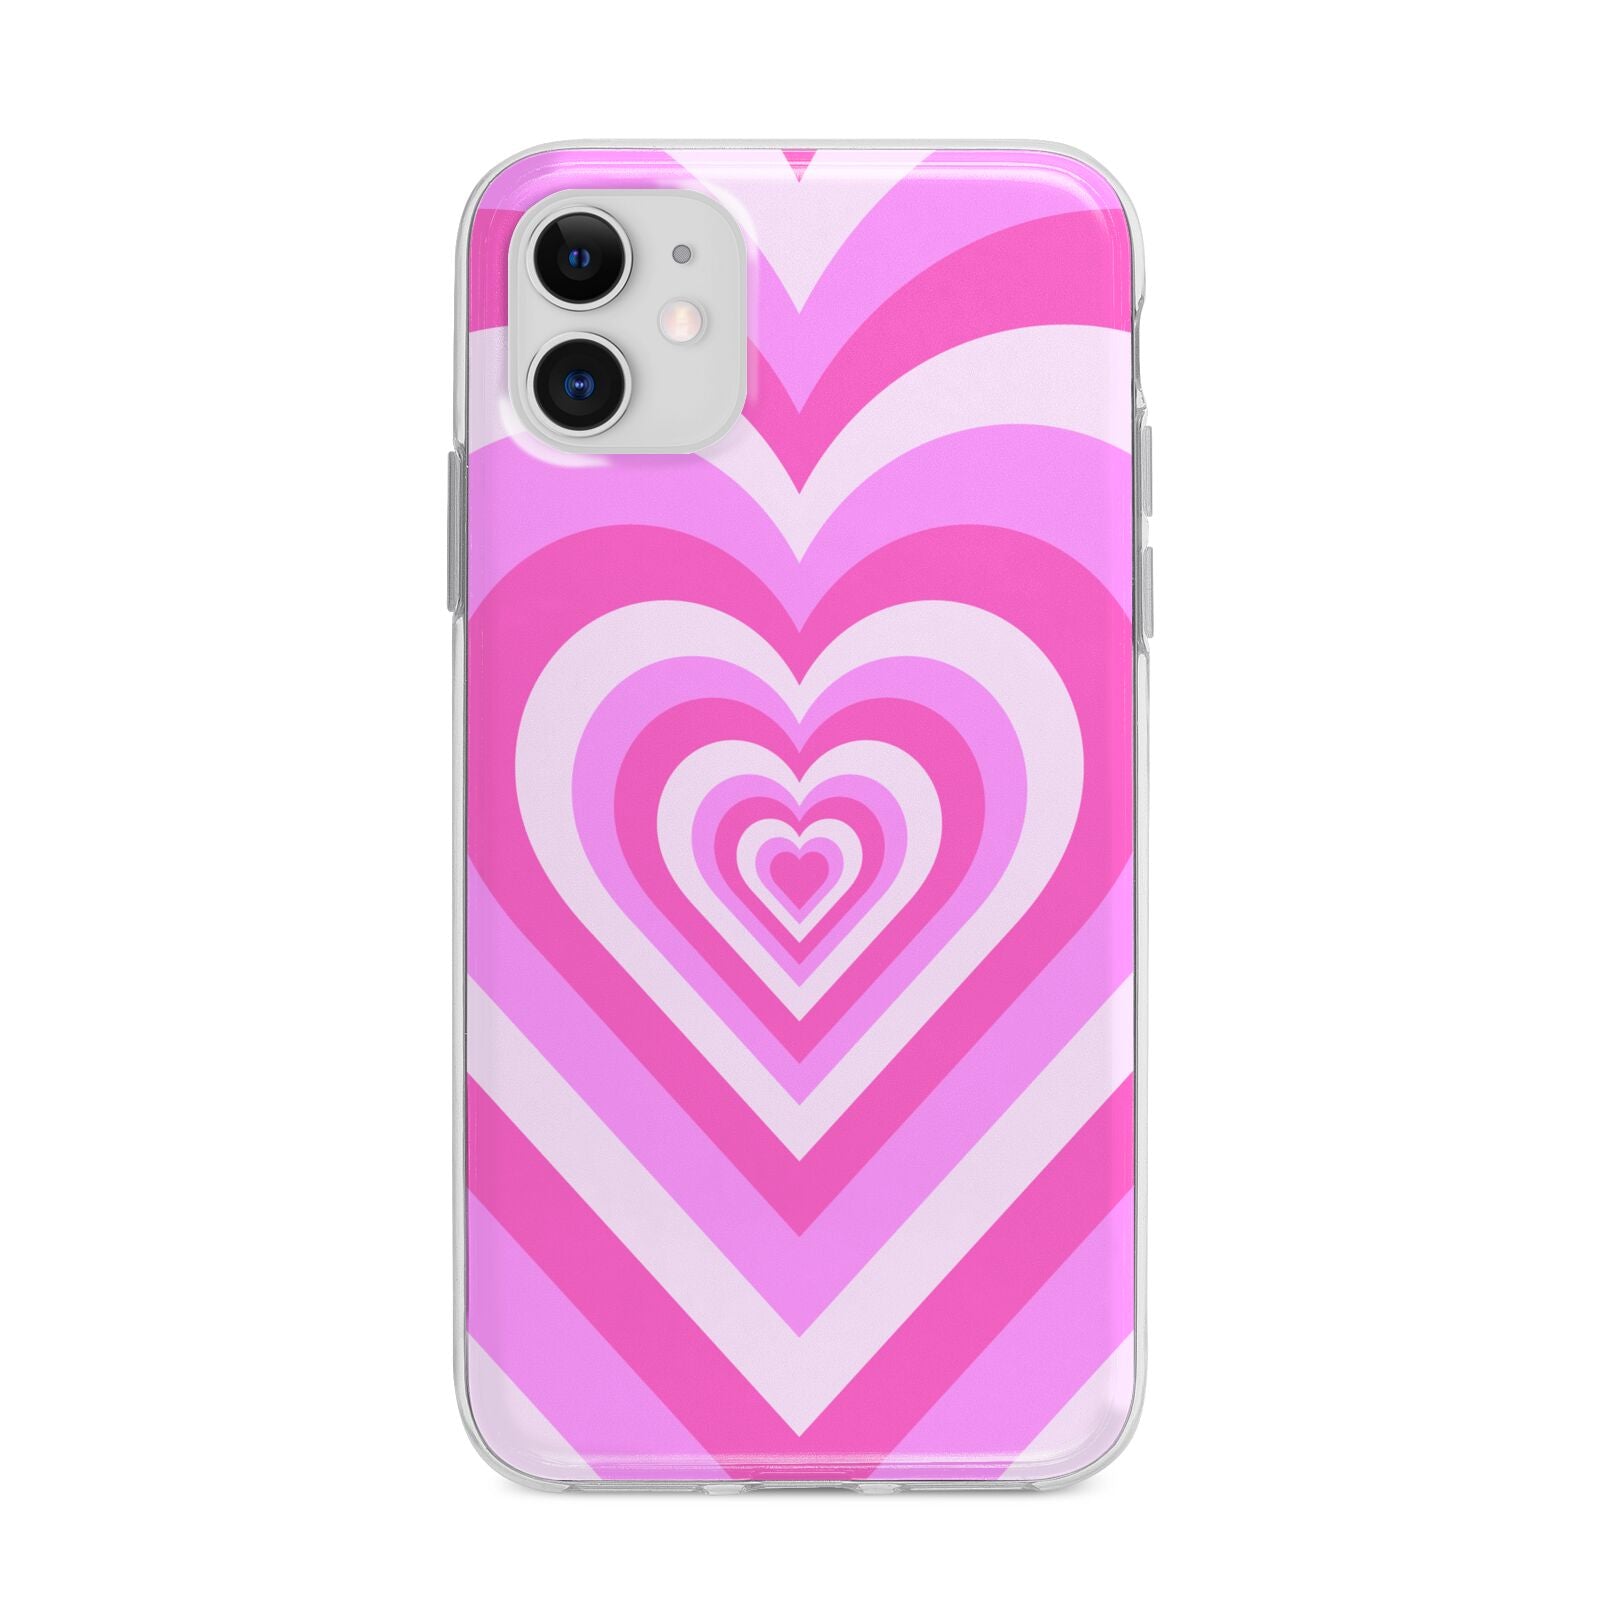 Aesthetic Heart Apple iPhone 11 in White with Bumper Case